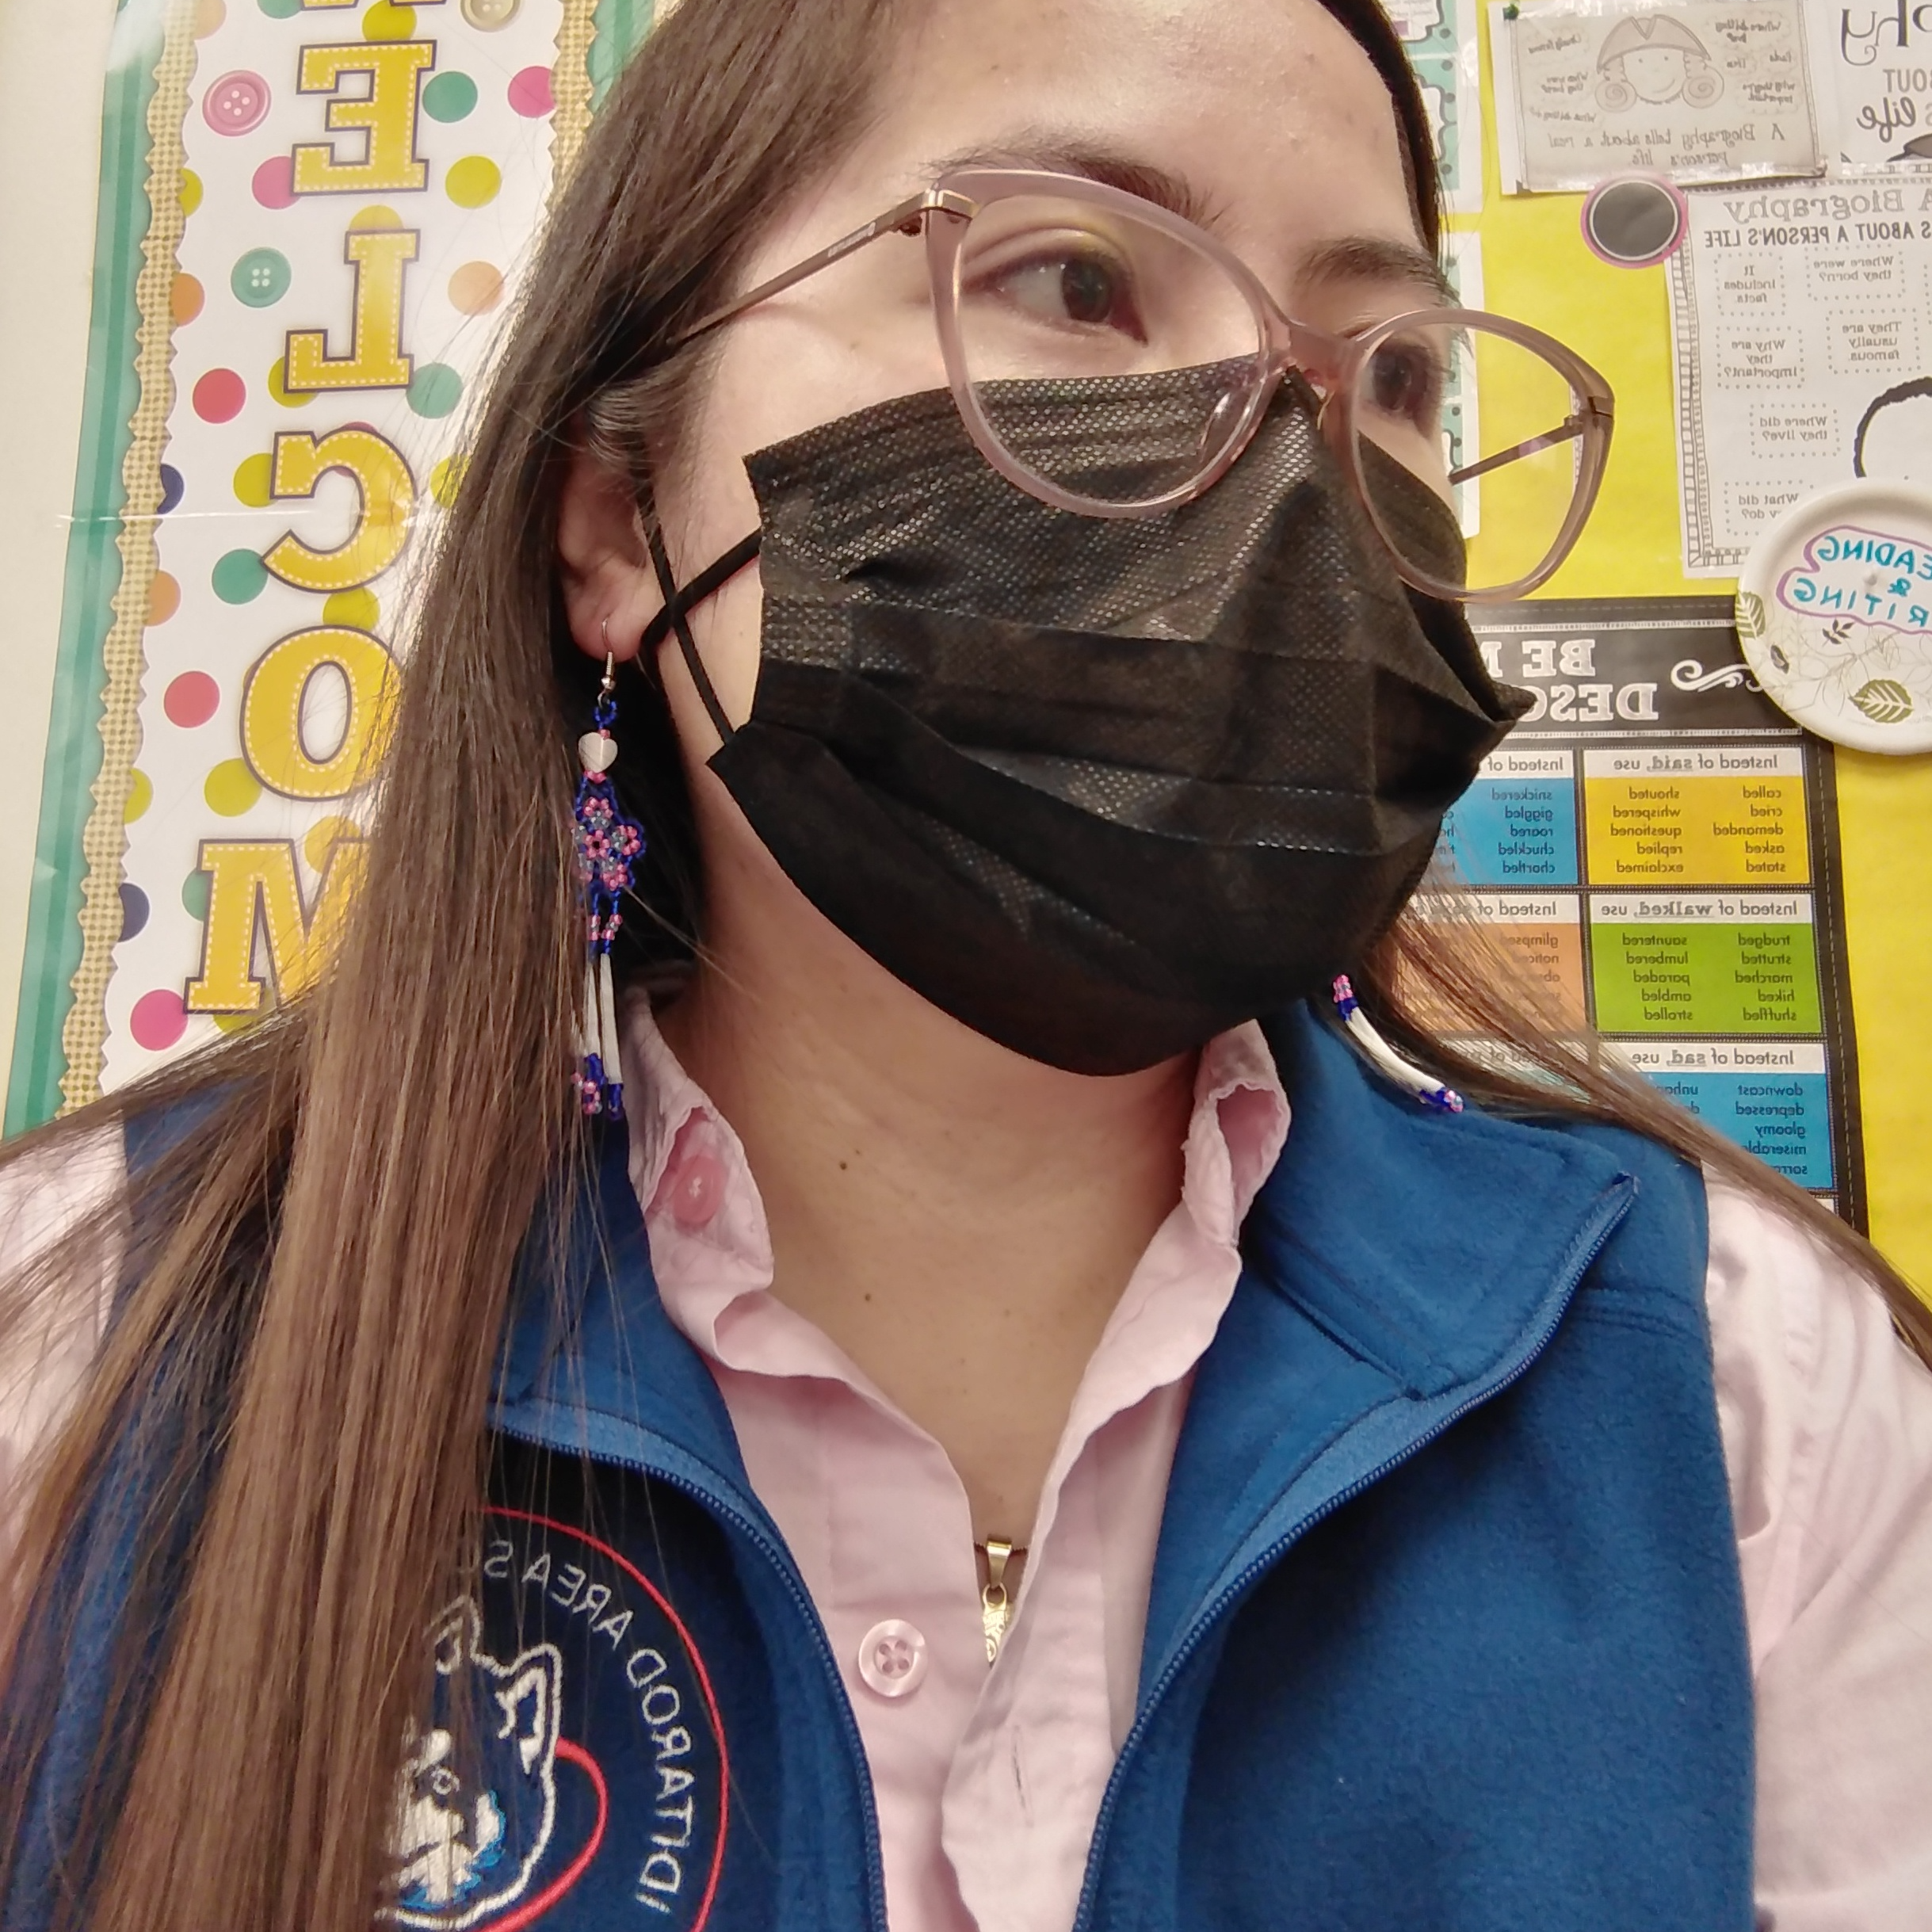 Image of Jollibe in classroom wearing blue iditarod vest with black facemask and glasses